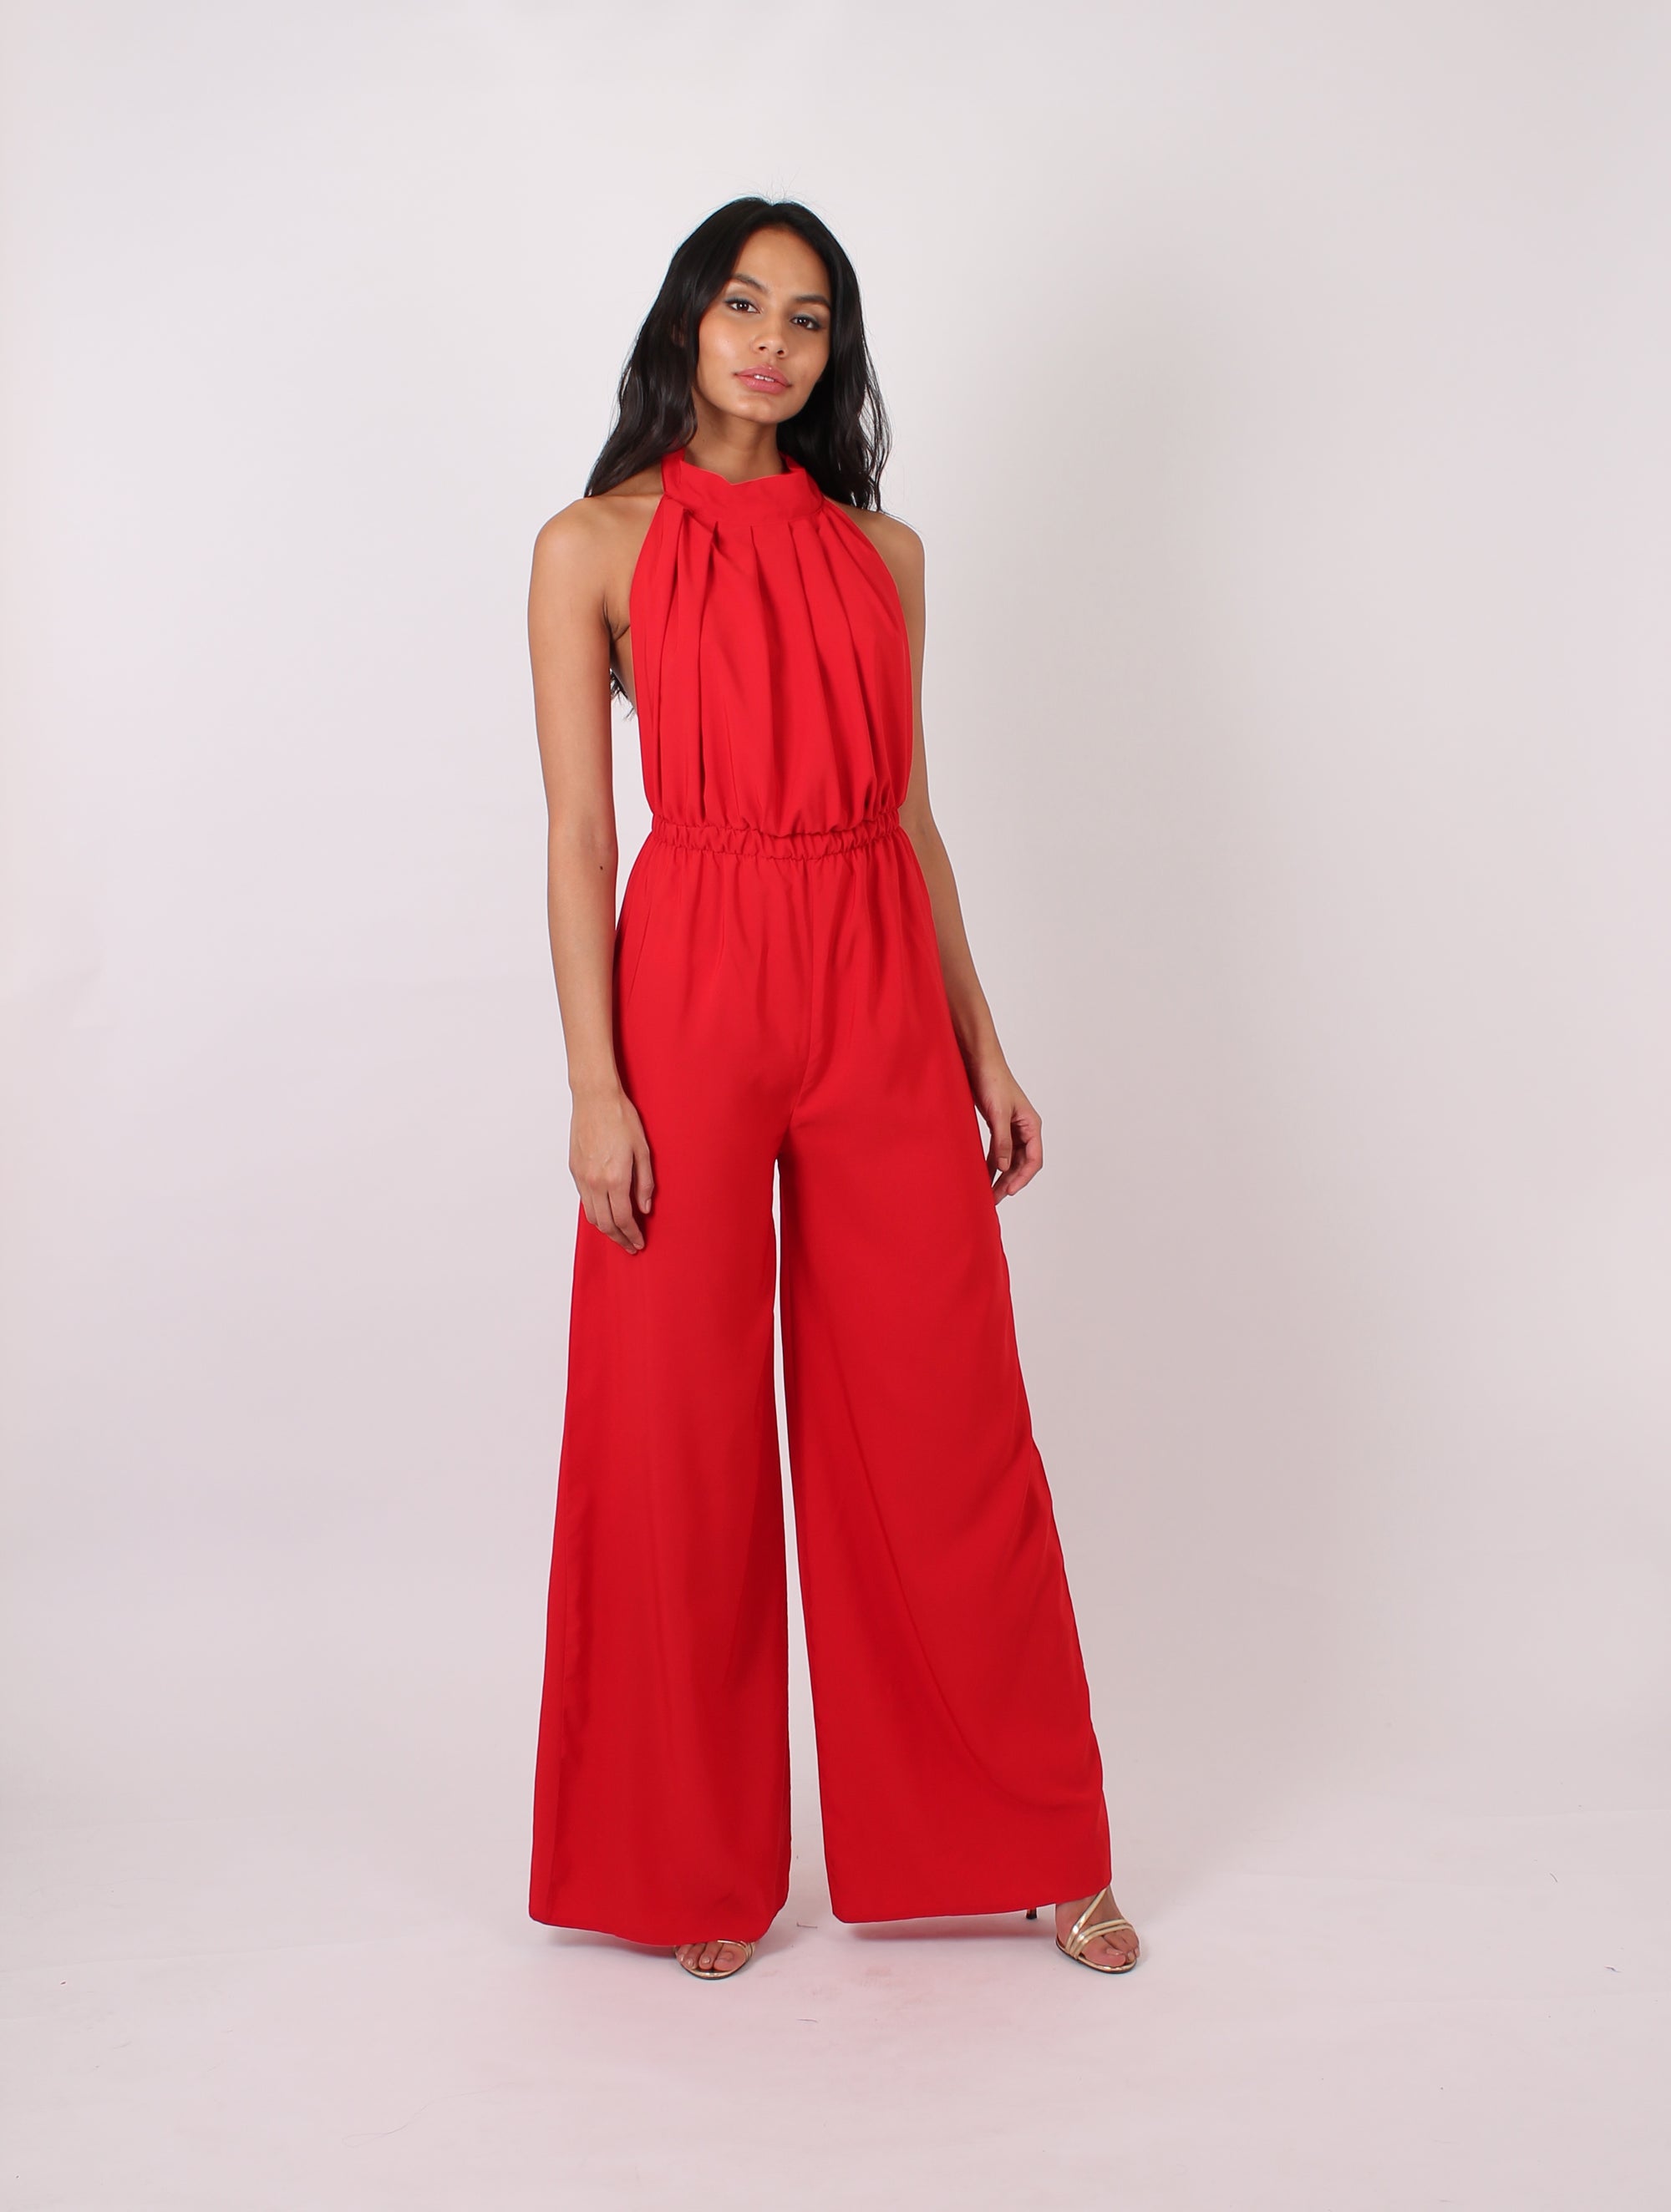 red backless jumpsuit with wide legs and a halter neck